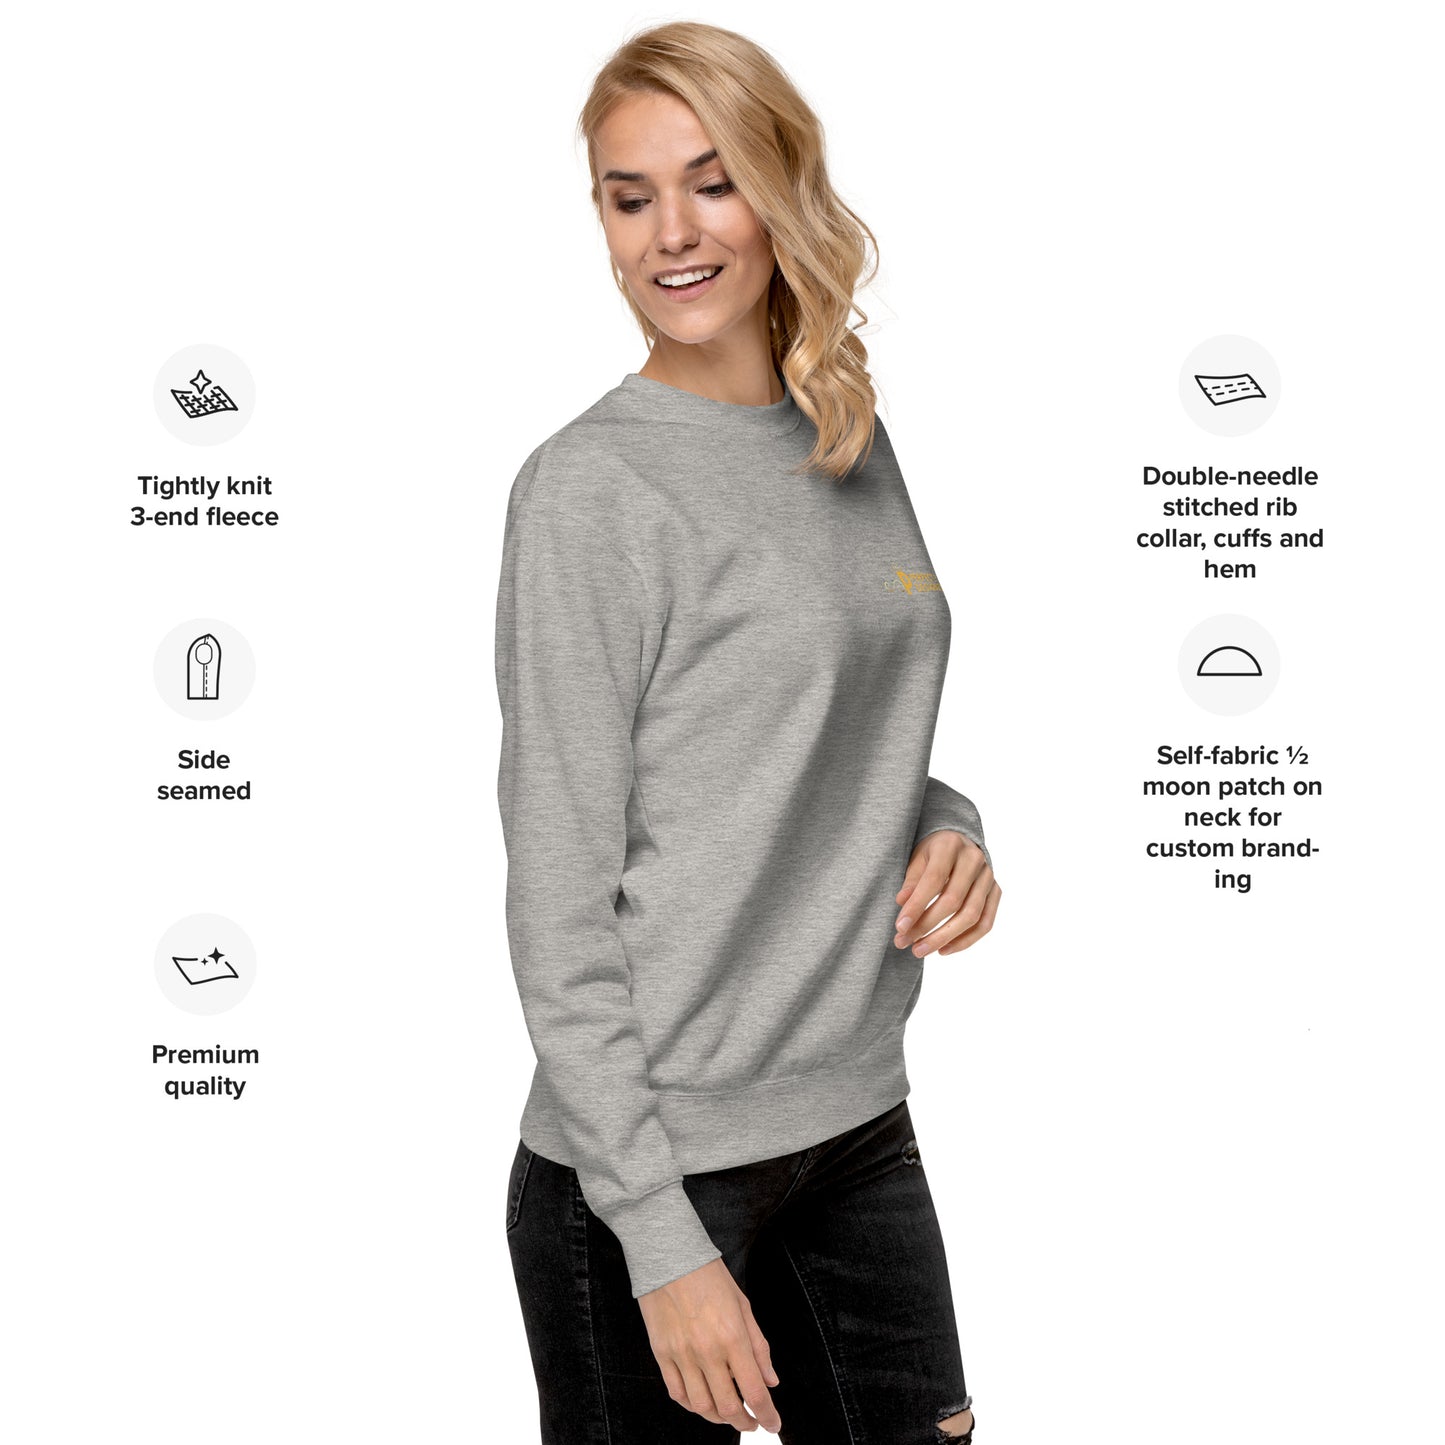 PERFECTLY DESIGNED: Empowerment Elegance: Motivate and Inspire Sweater